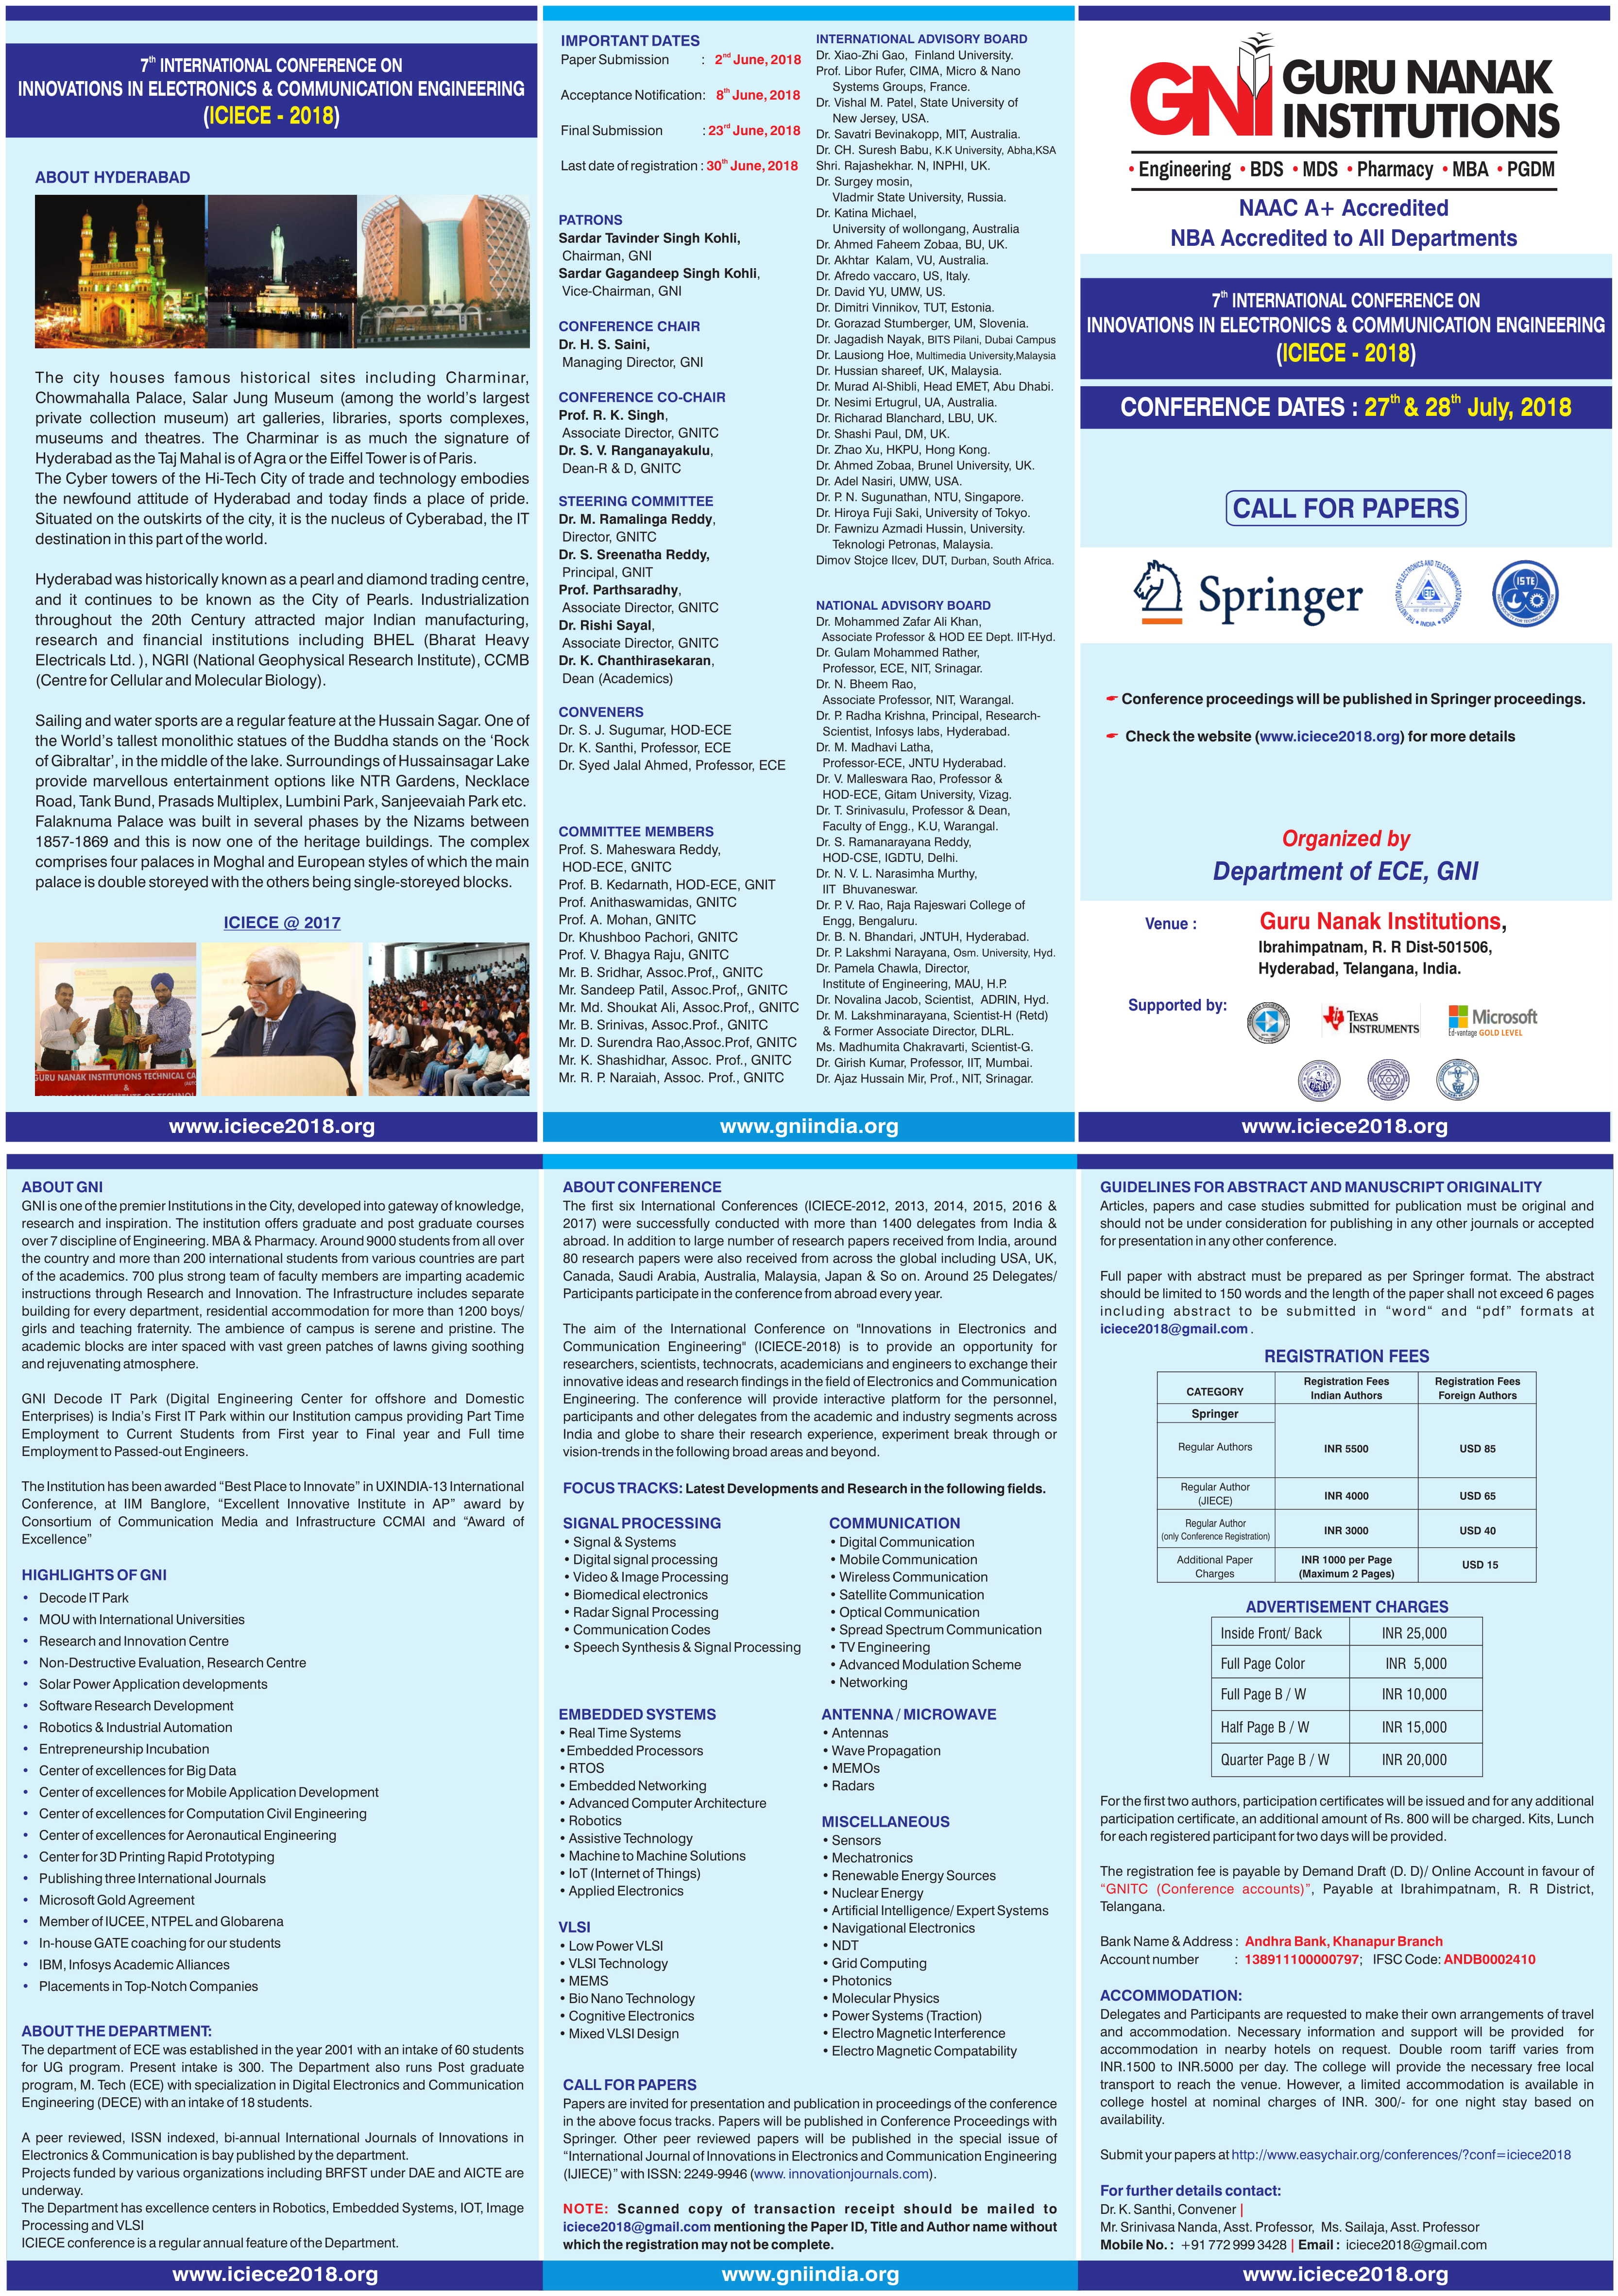 7th INTERNATIONAL CONFERENCE ON INNOVATIONS IN ELECTRONICS & COMMUNICATION ENGINEERING (ICIECE - 2018)